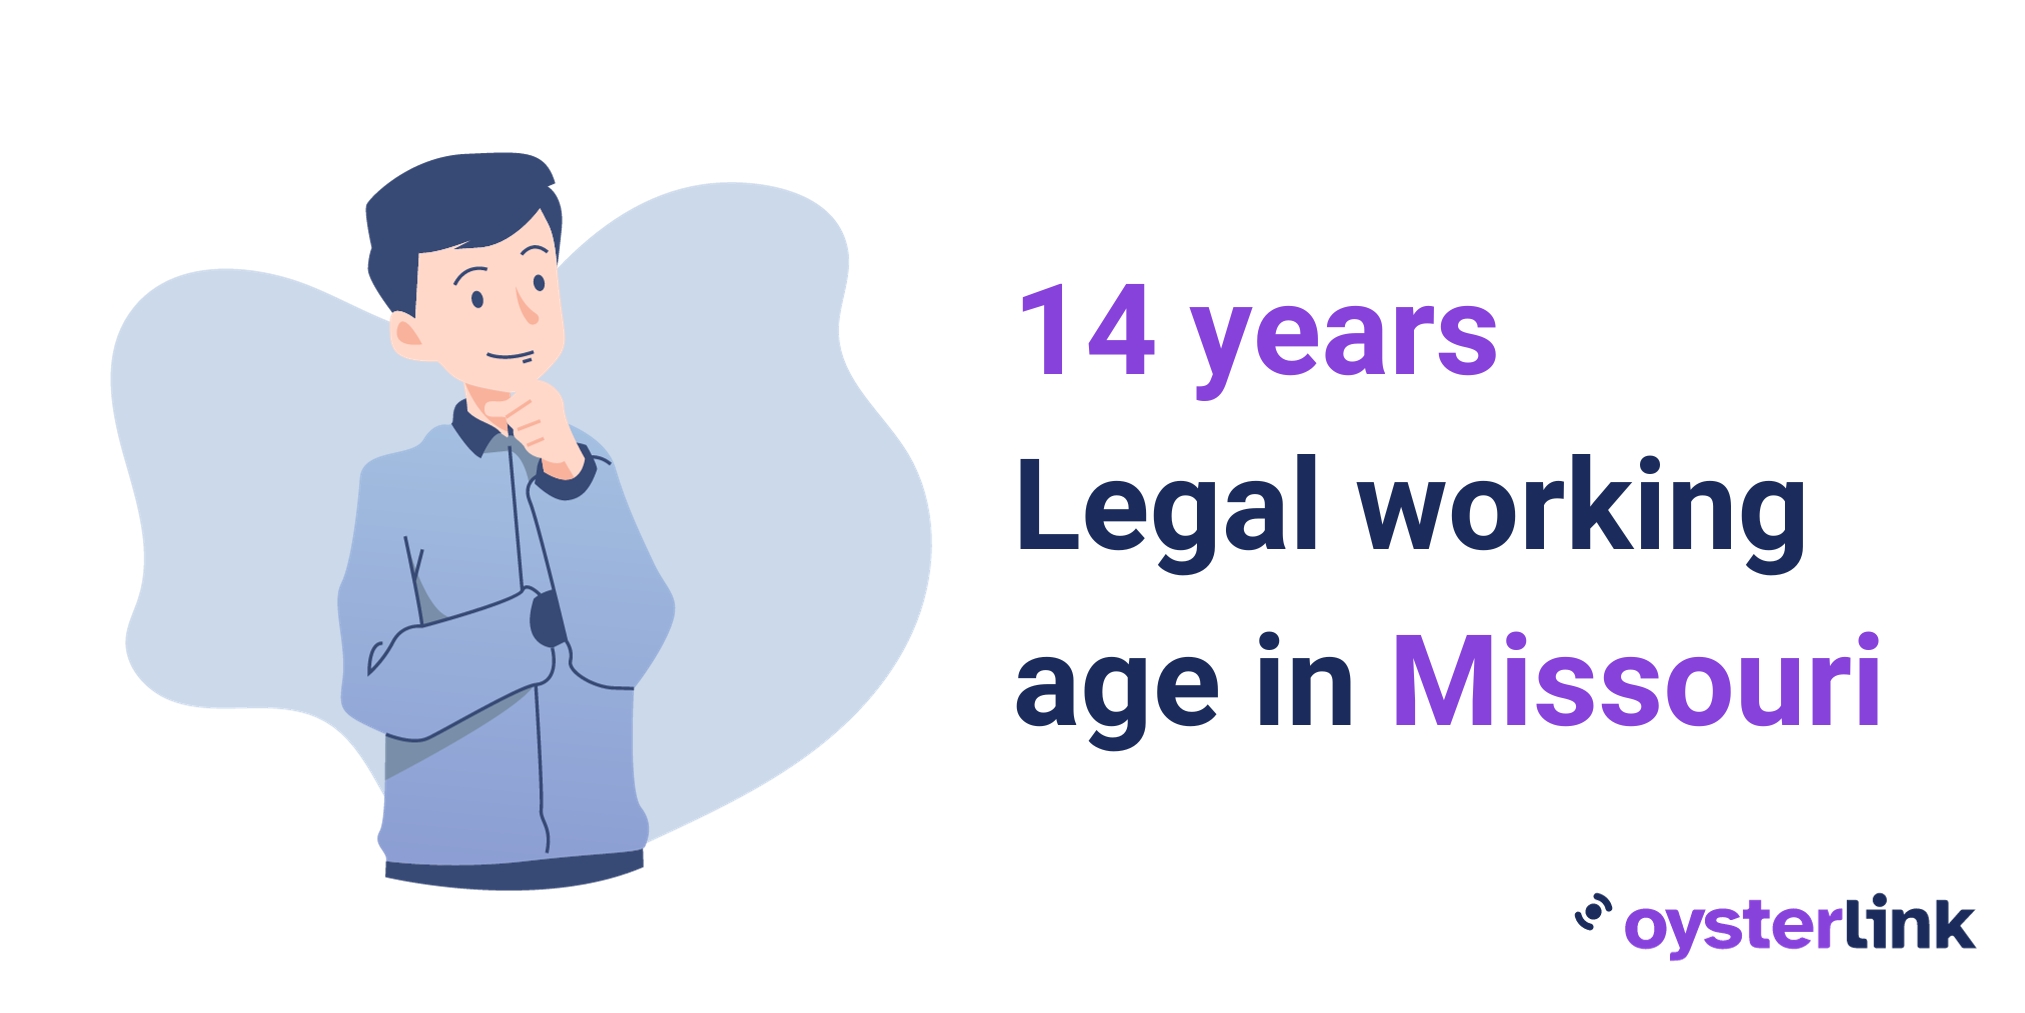 A graphic showing how 14 years of age is the legal working age in Missouri.